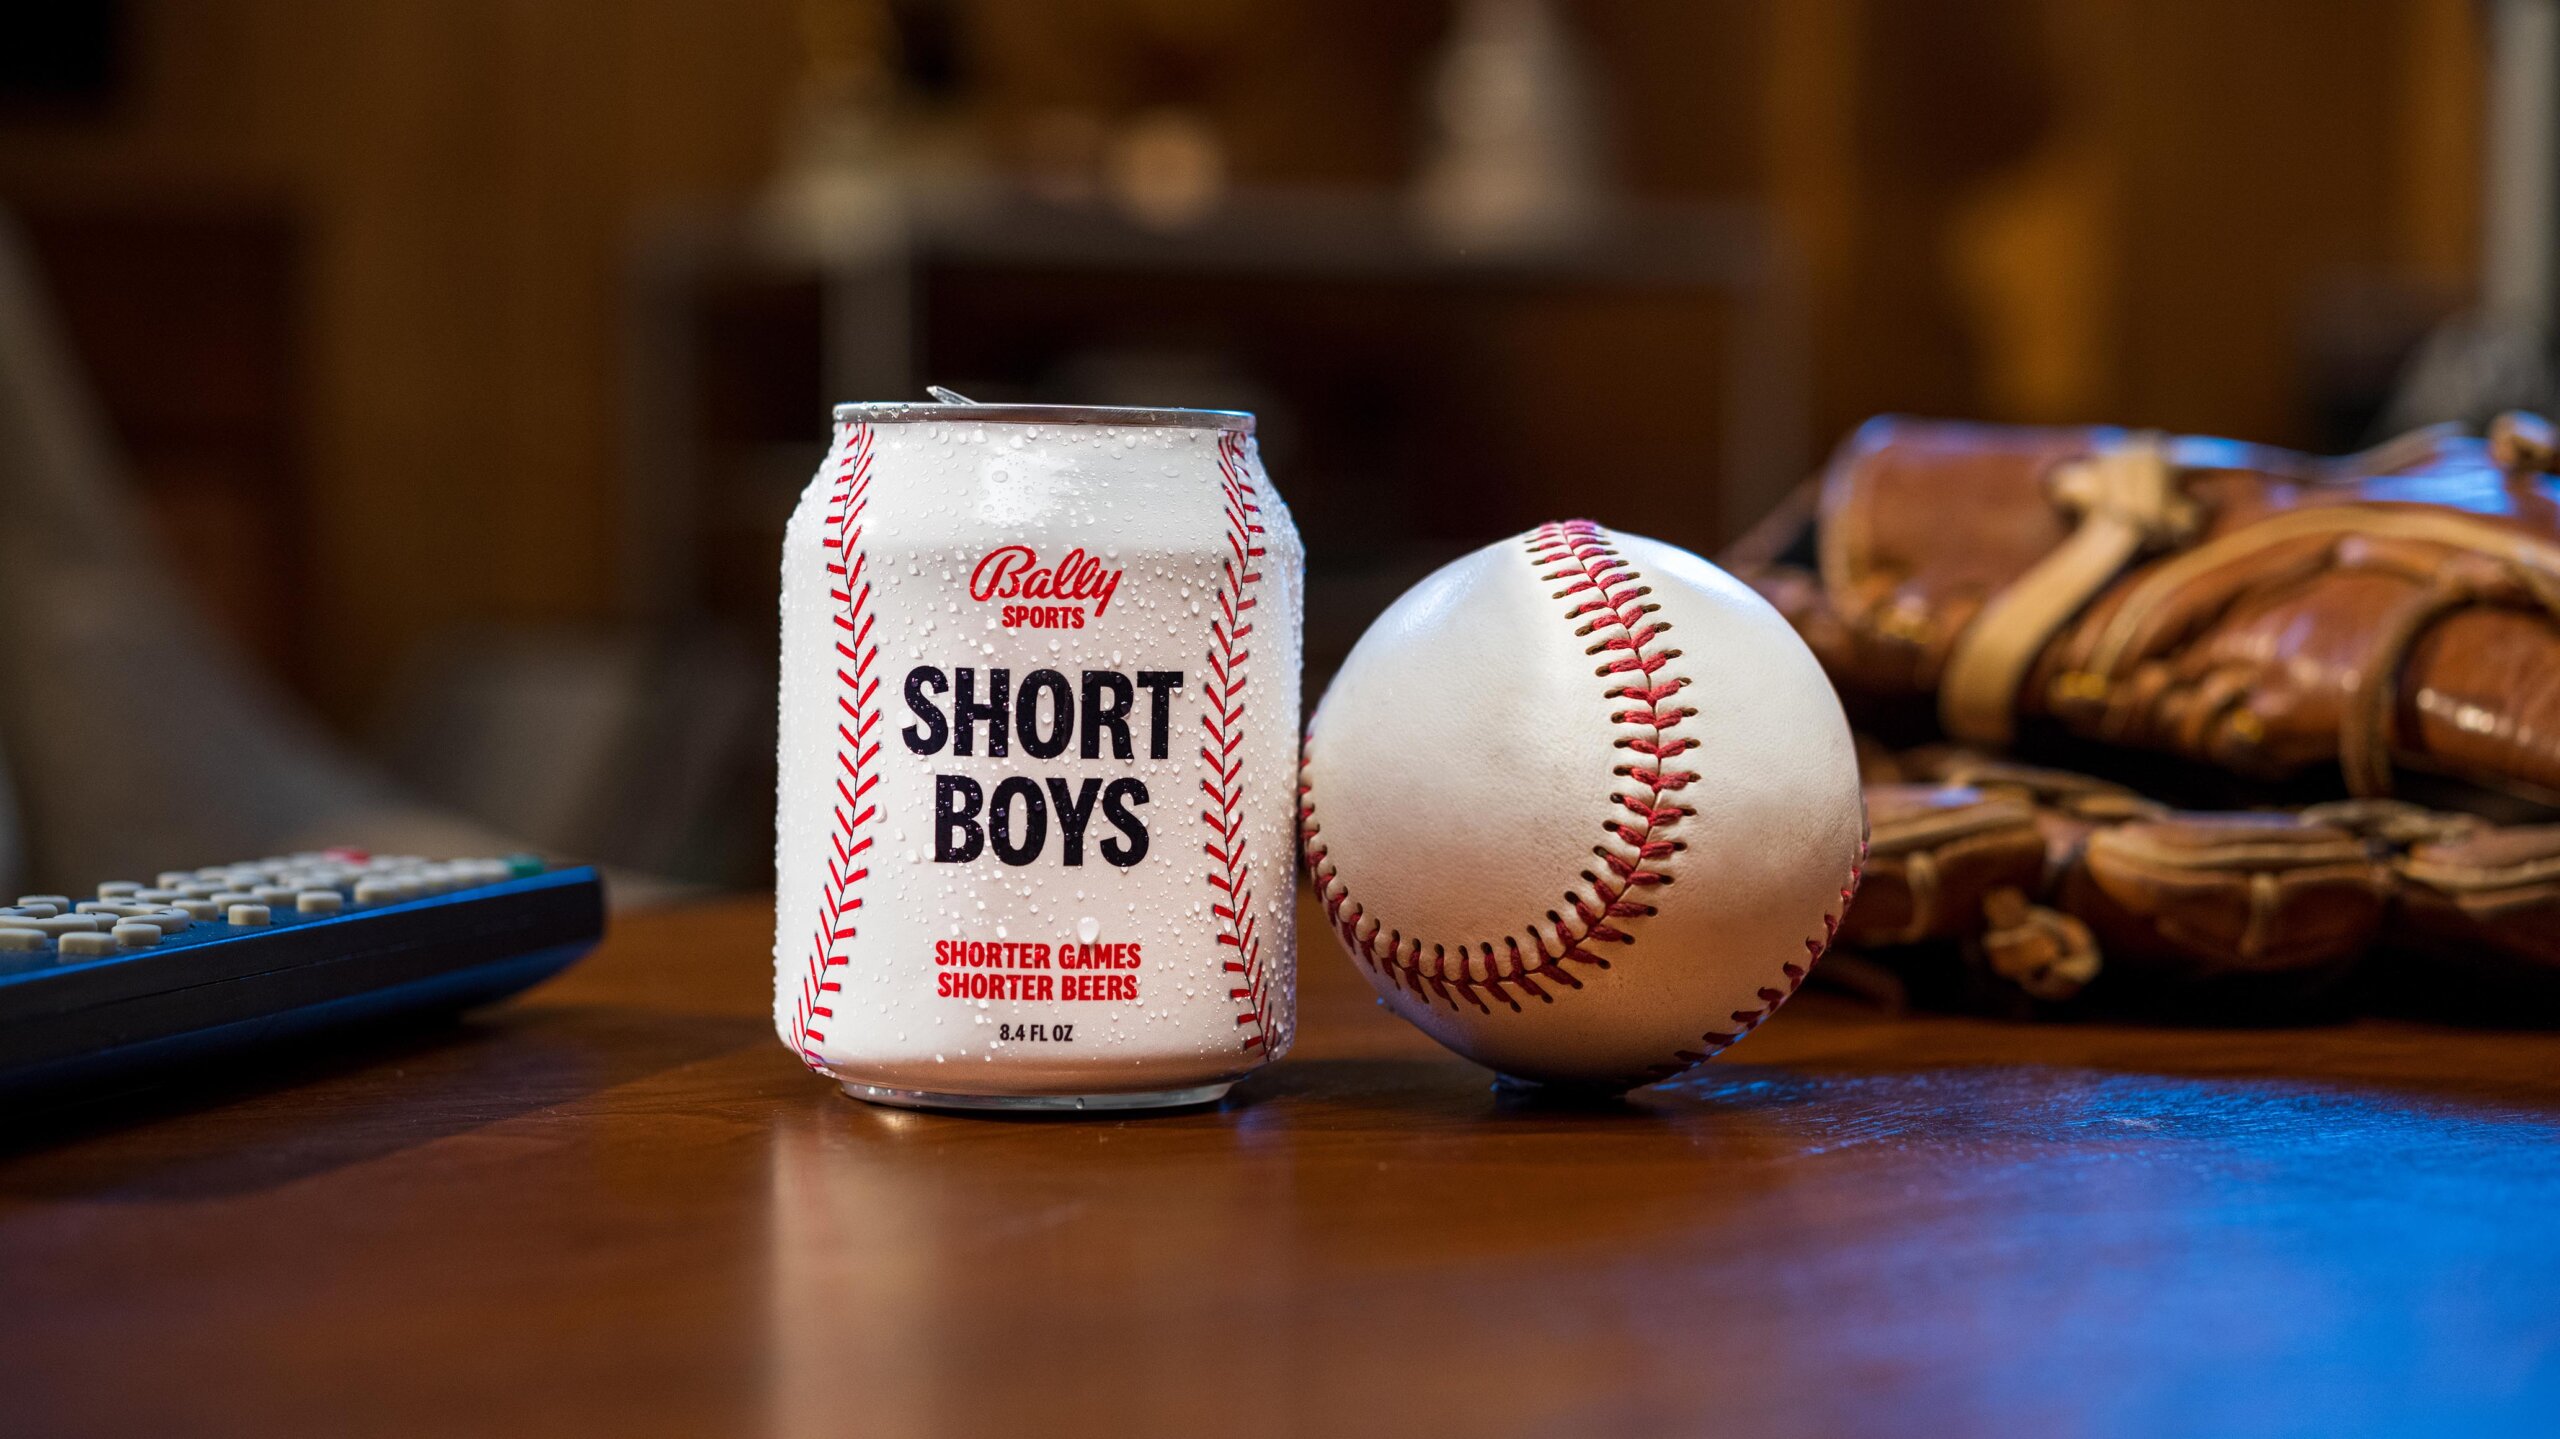 a shorter than average can of beer sits on a table next to a baseball, with a TV remote control and a baseball glove in the background. The can says Bally Sports Short Boys; Shorter Games, Shorter Beers 8.4 FL OZ